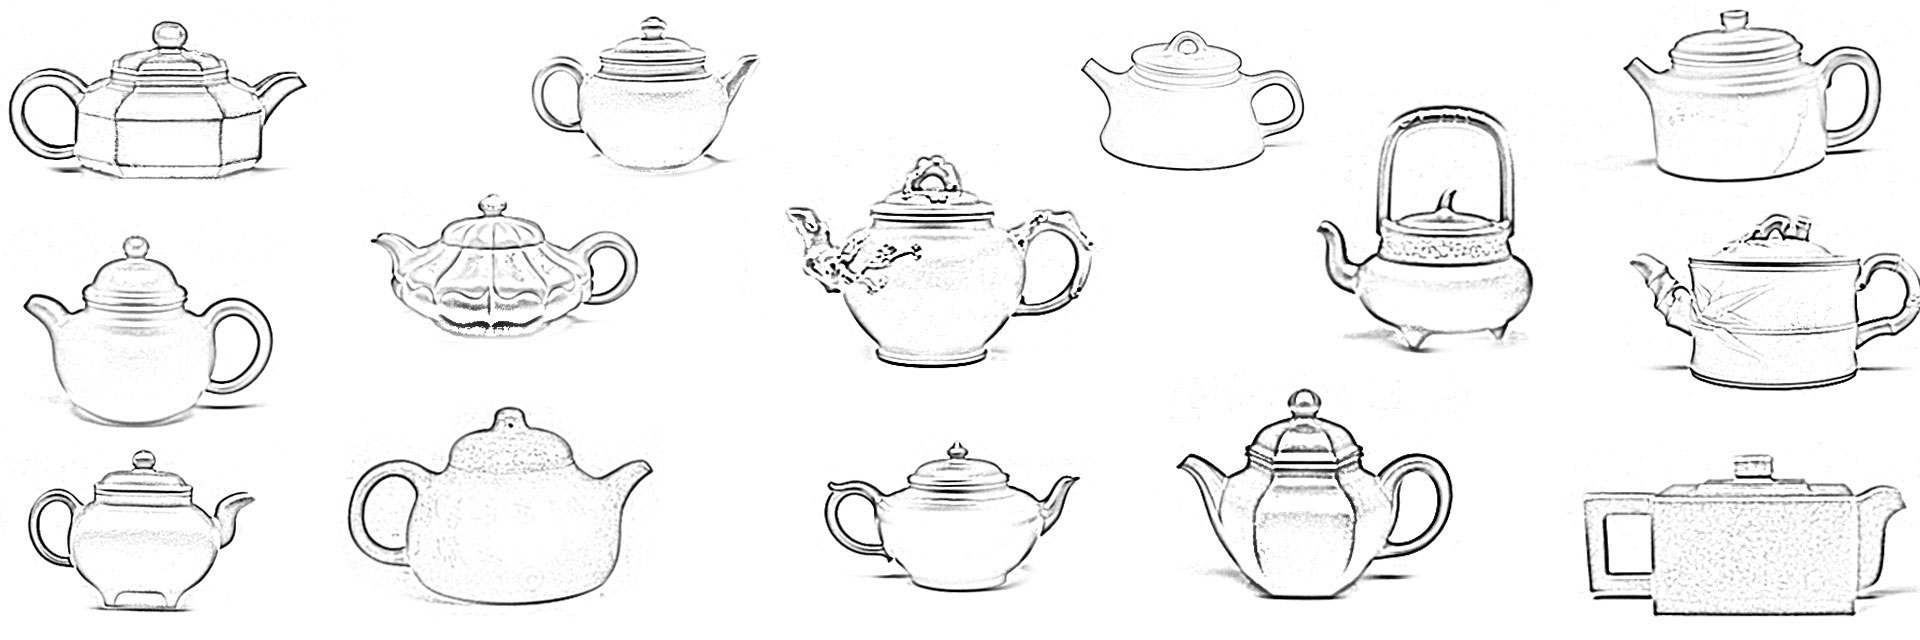 An Introduction to Teapot Shapes Ⅱ